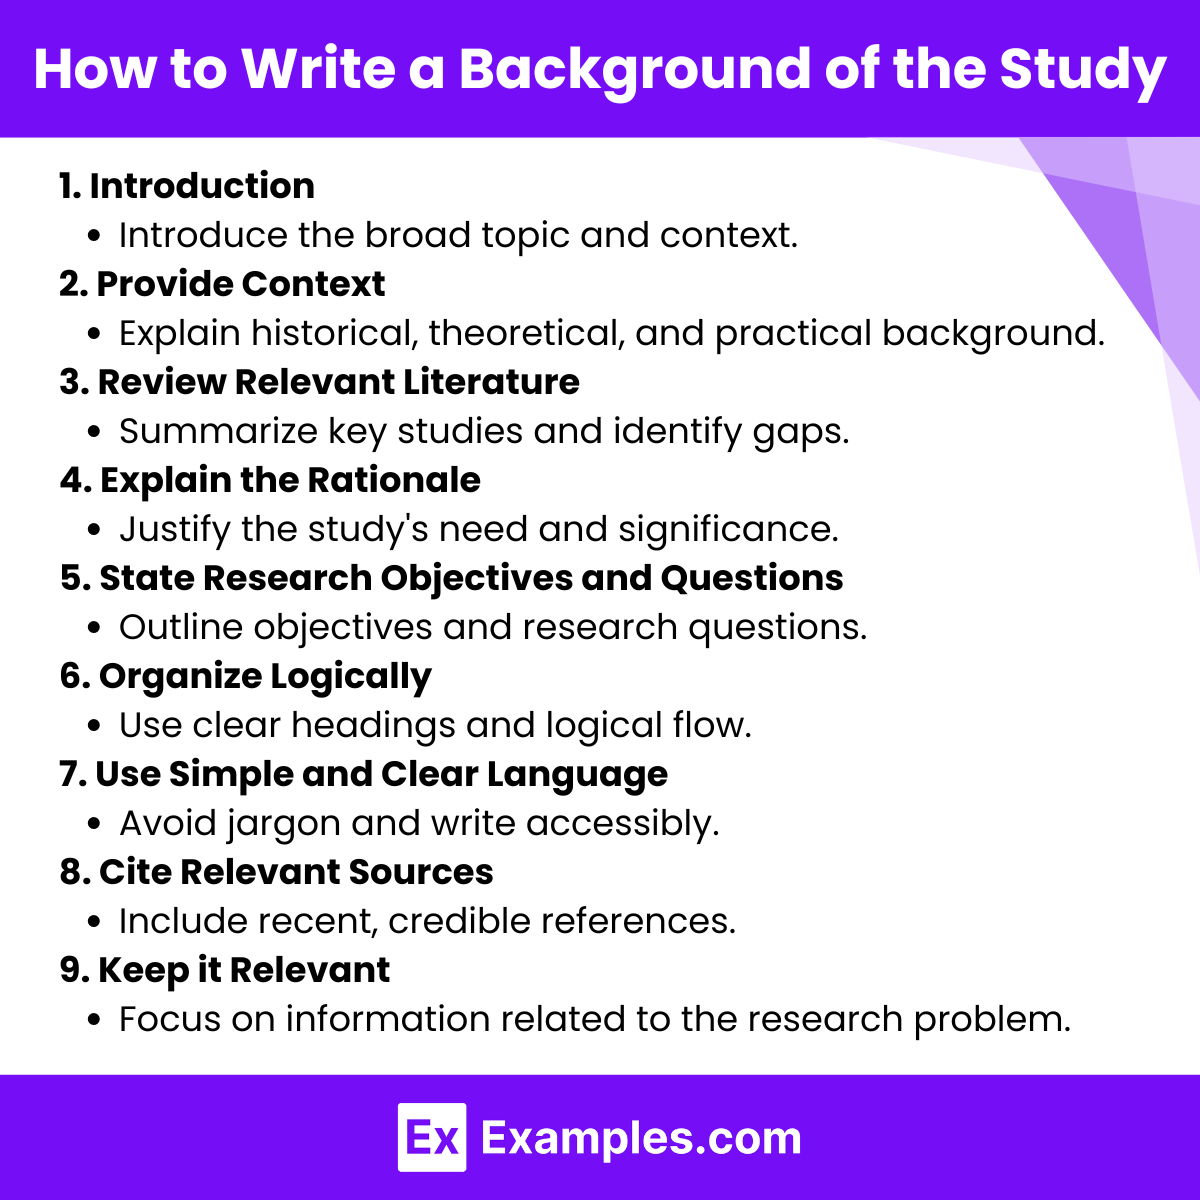 How to Write a Background of the Study